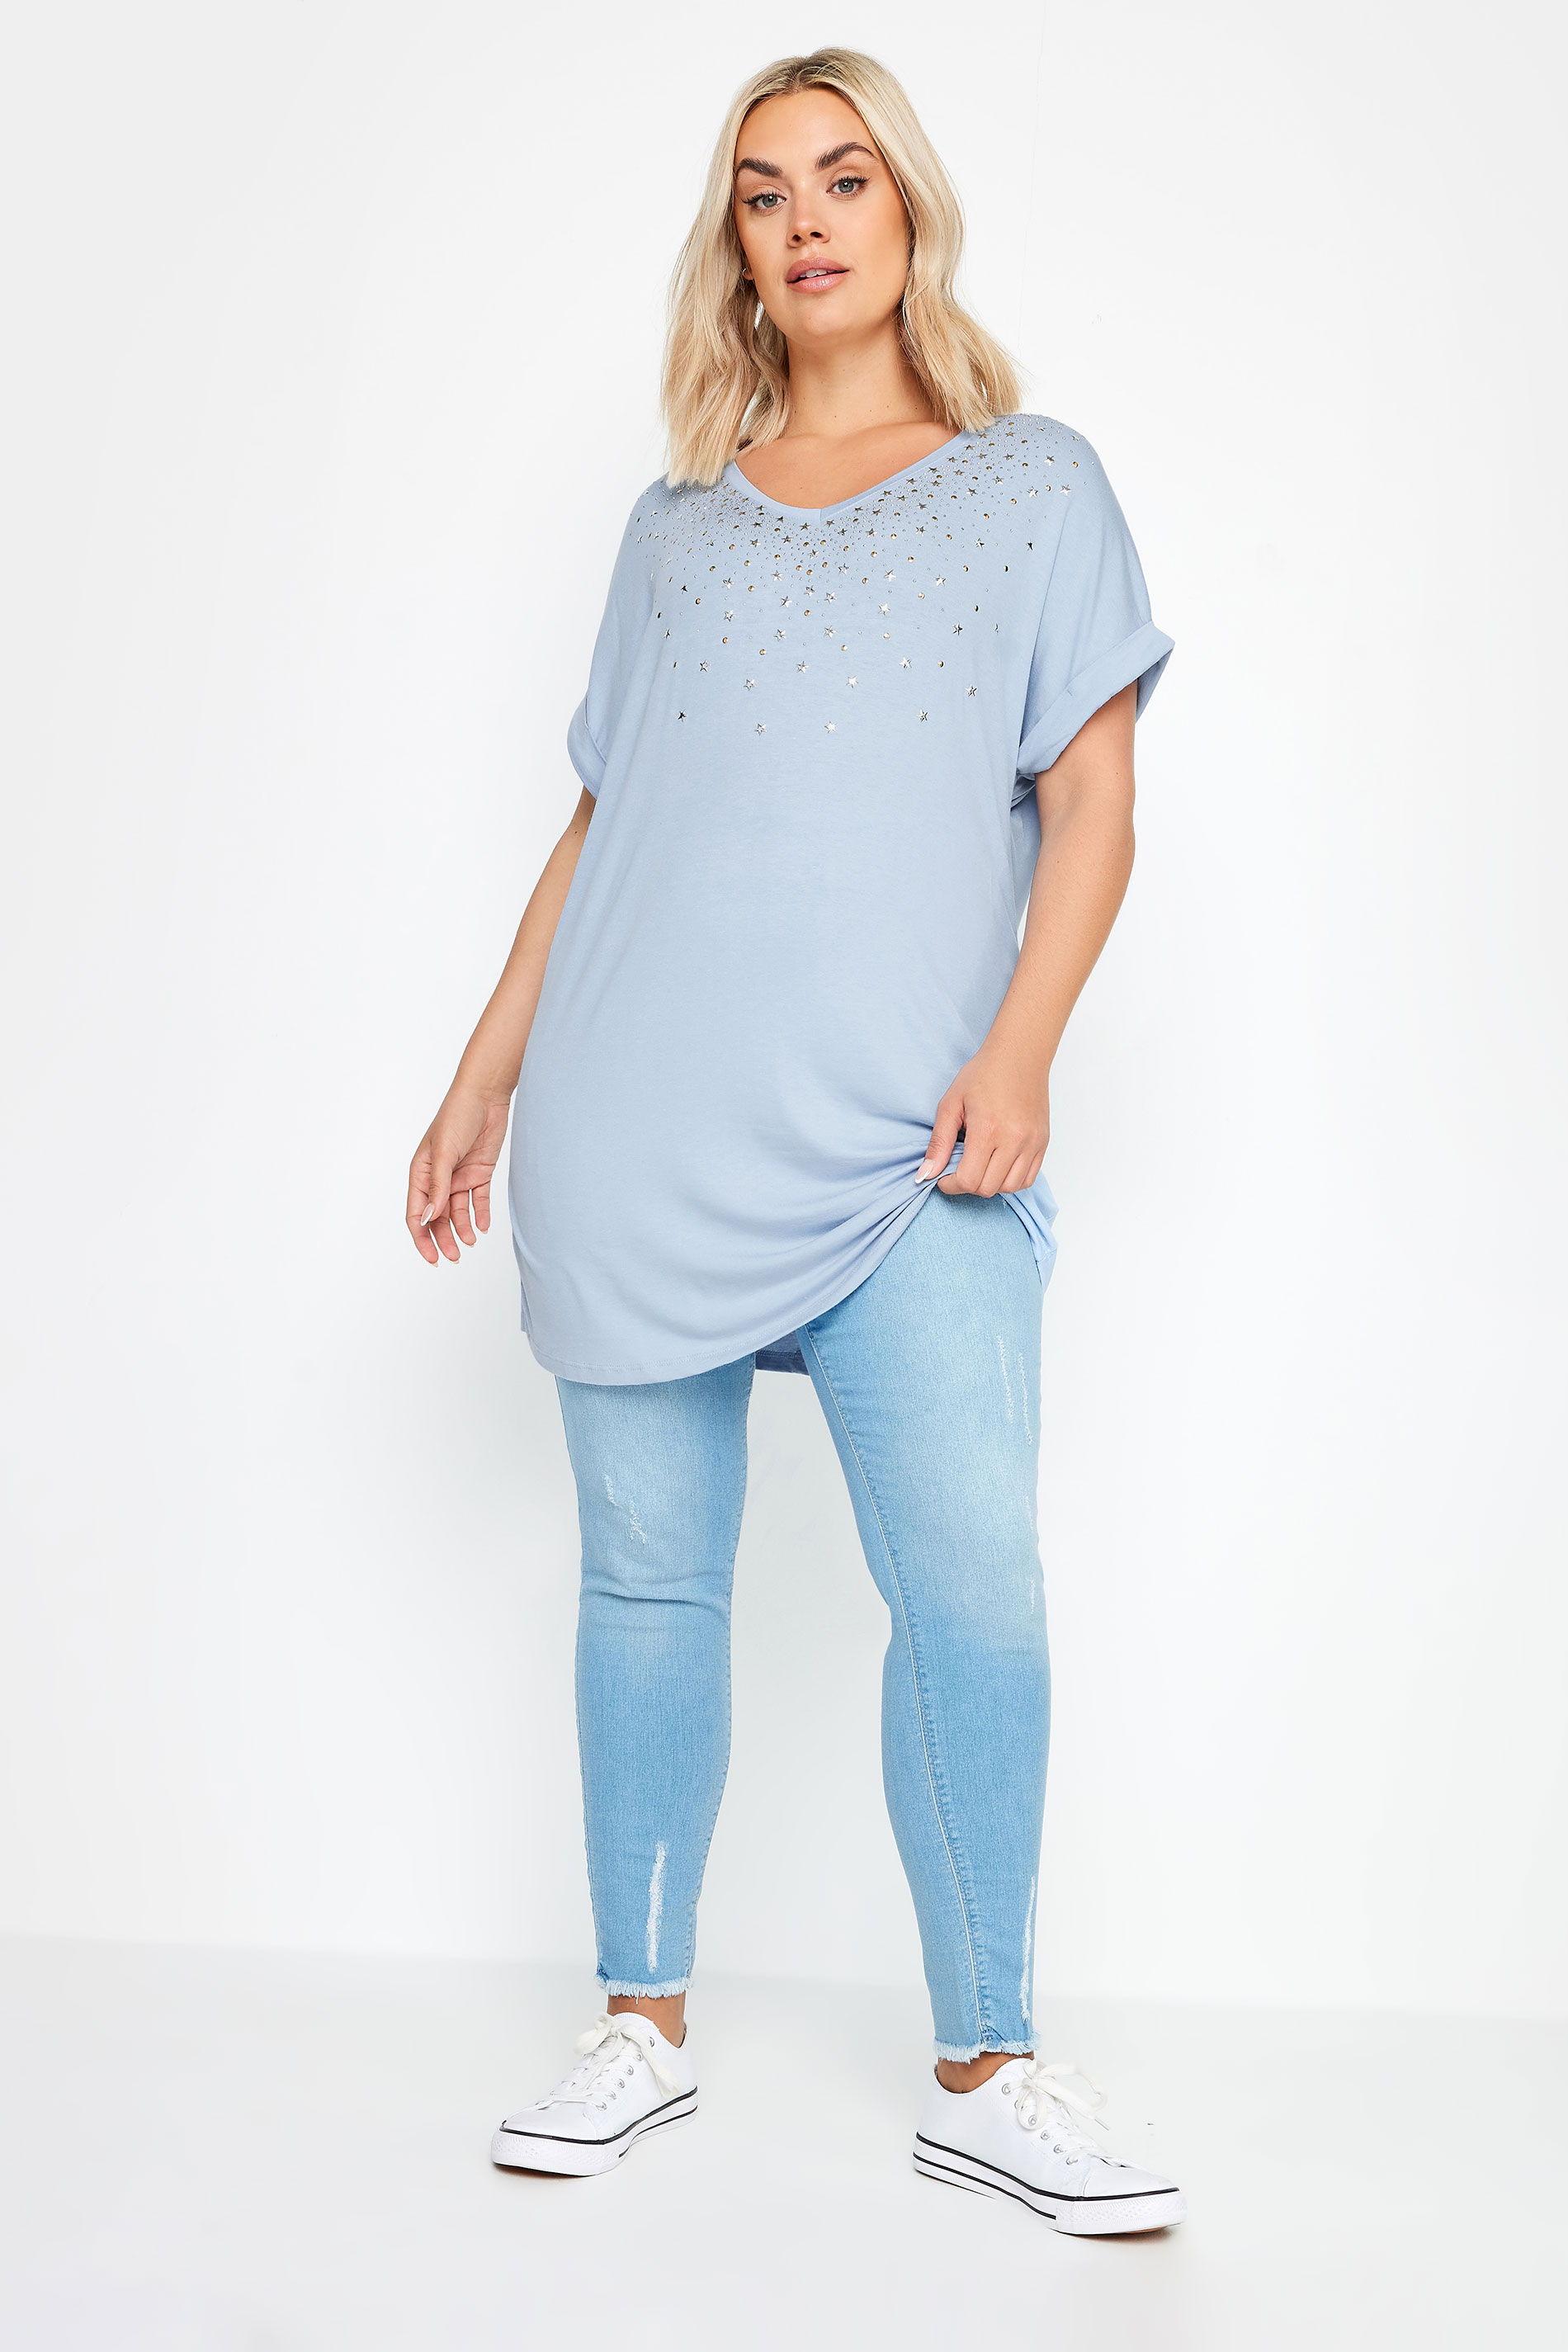 YOURS Plus Size Light Blue Sequin Star Embellished T-Shirt | Yours Clothing 2